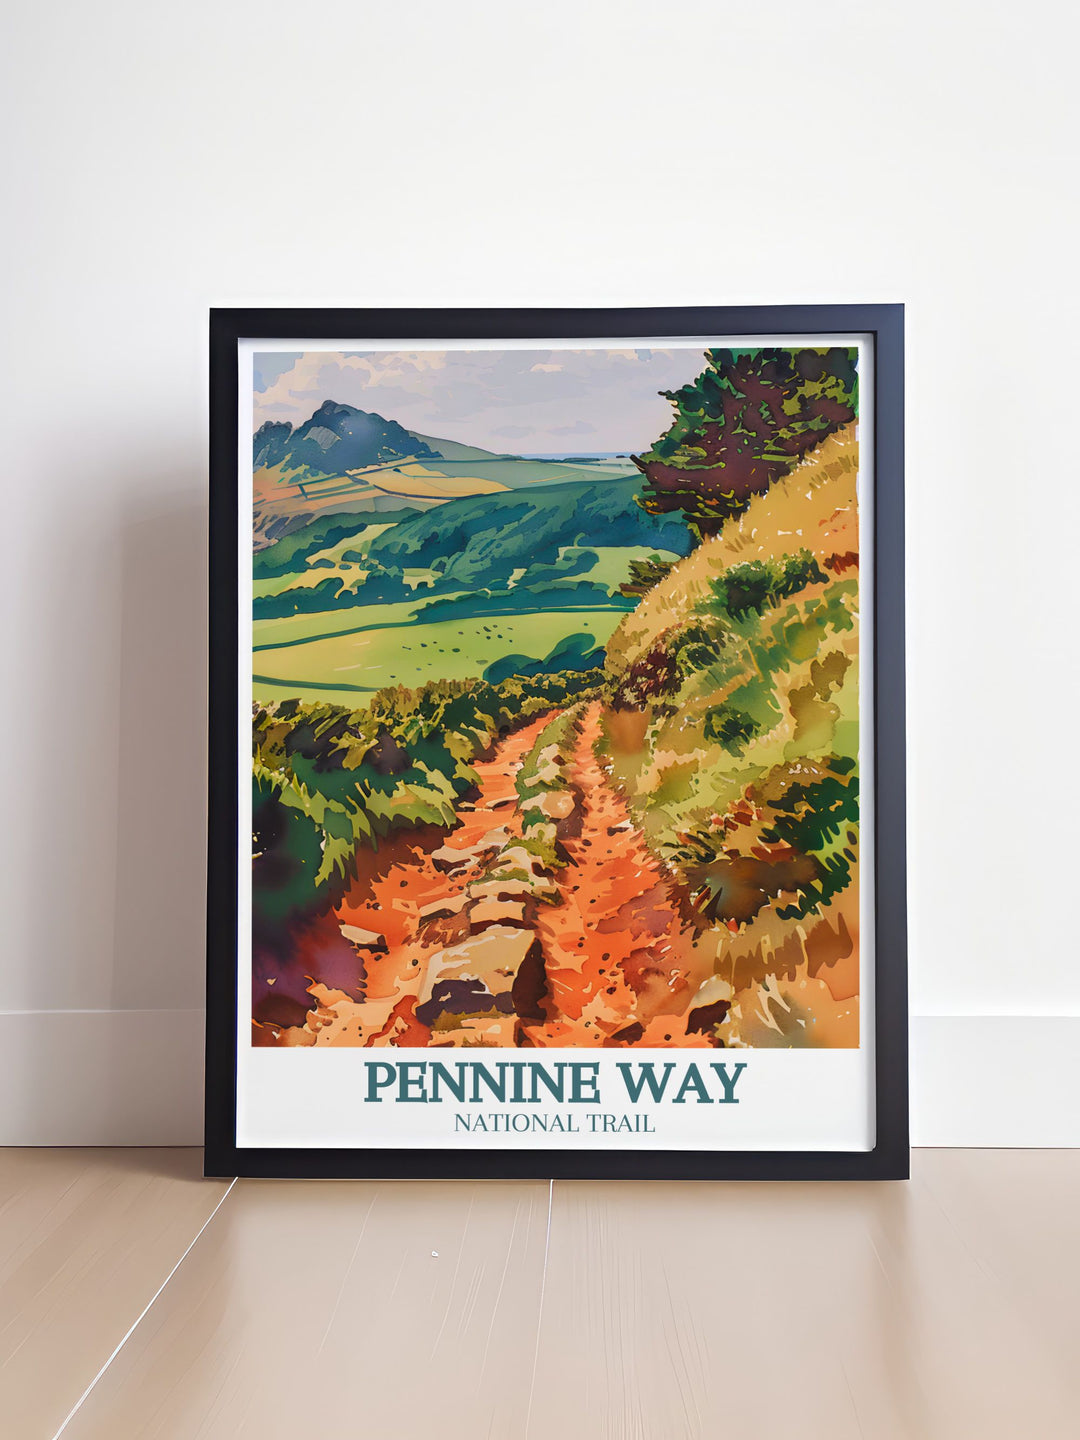 Bucket List Prints featuring the scenic trails and natural wonders of the Pennines ideal for travelers and hikers who dream of exploring the Pennine Way and North Pennines